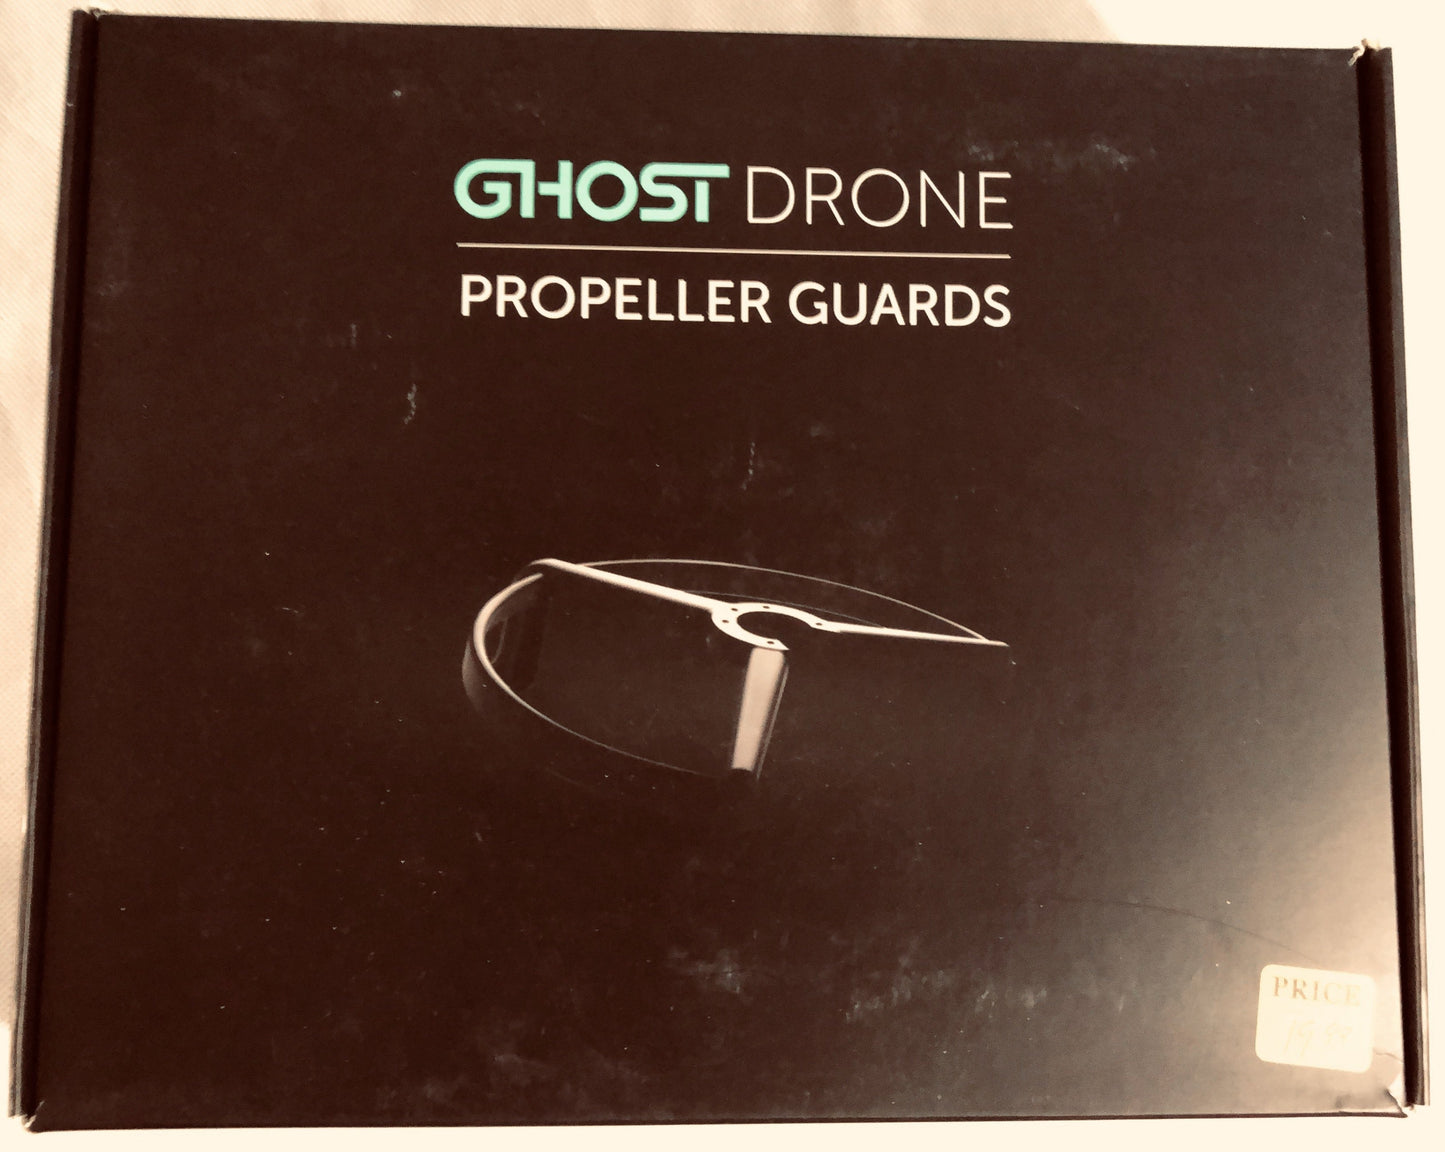  Ehang Ghost-Drone Aerial 1 EHG03LL Android Compatible, no camera